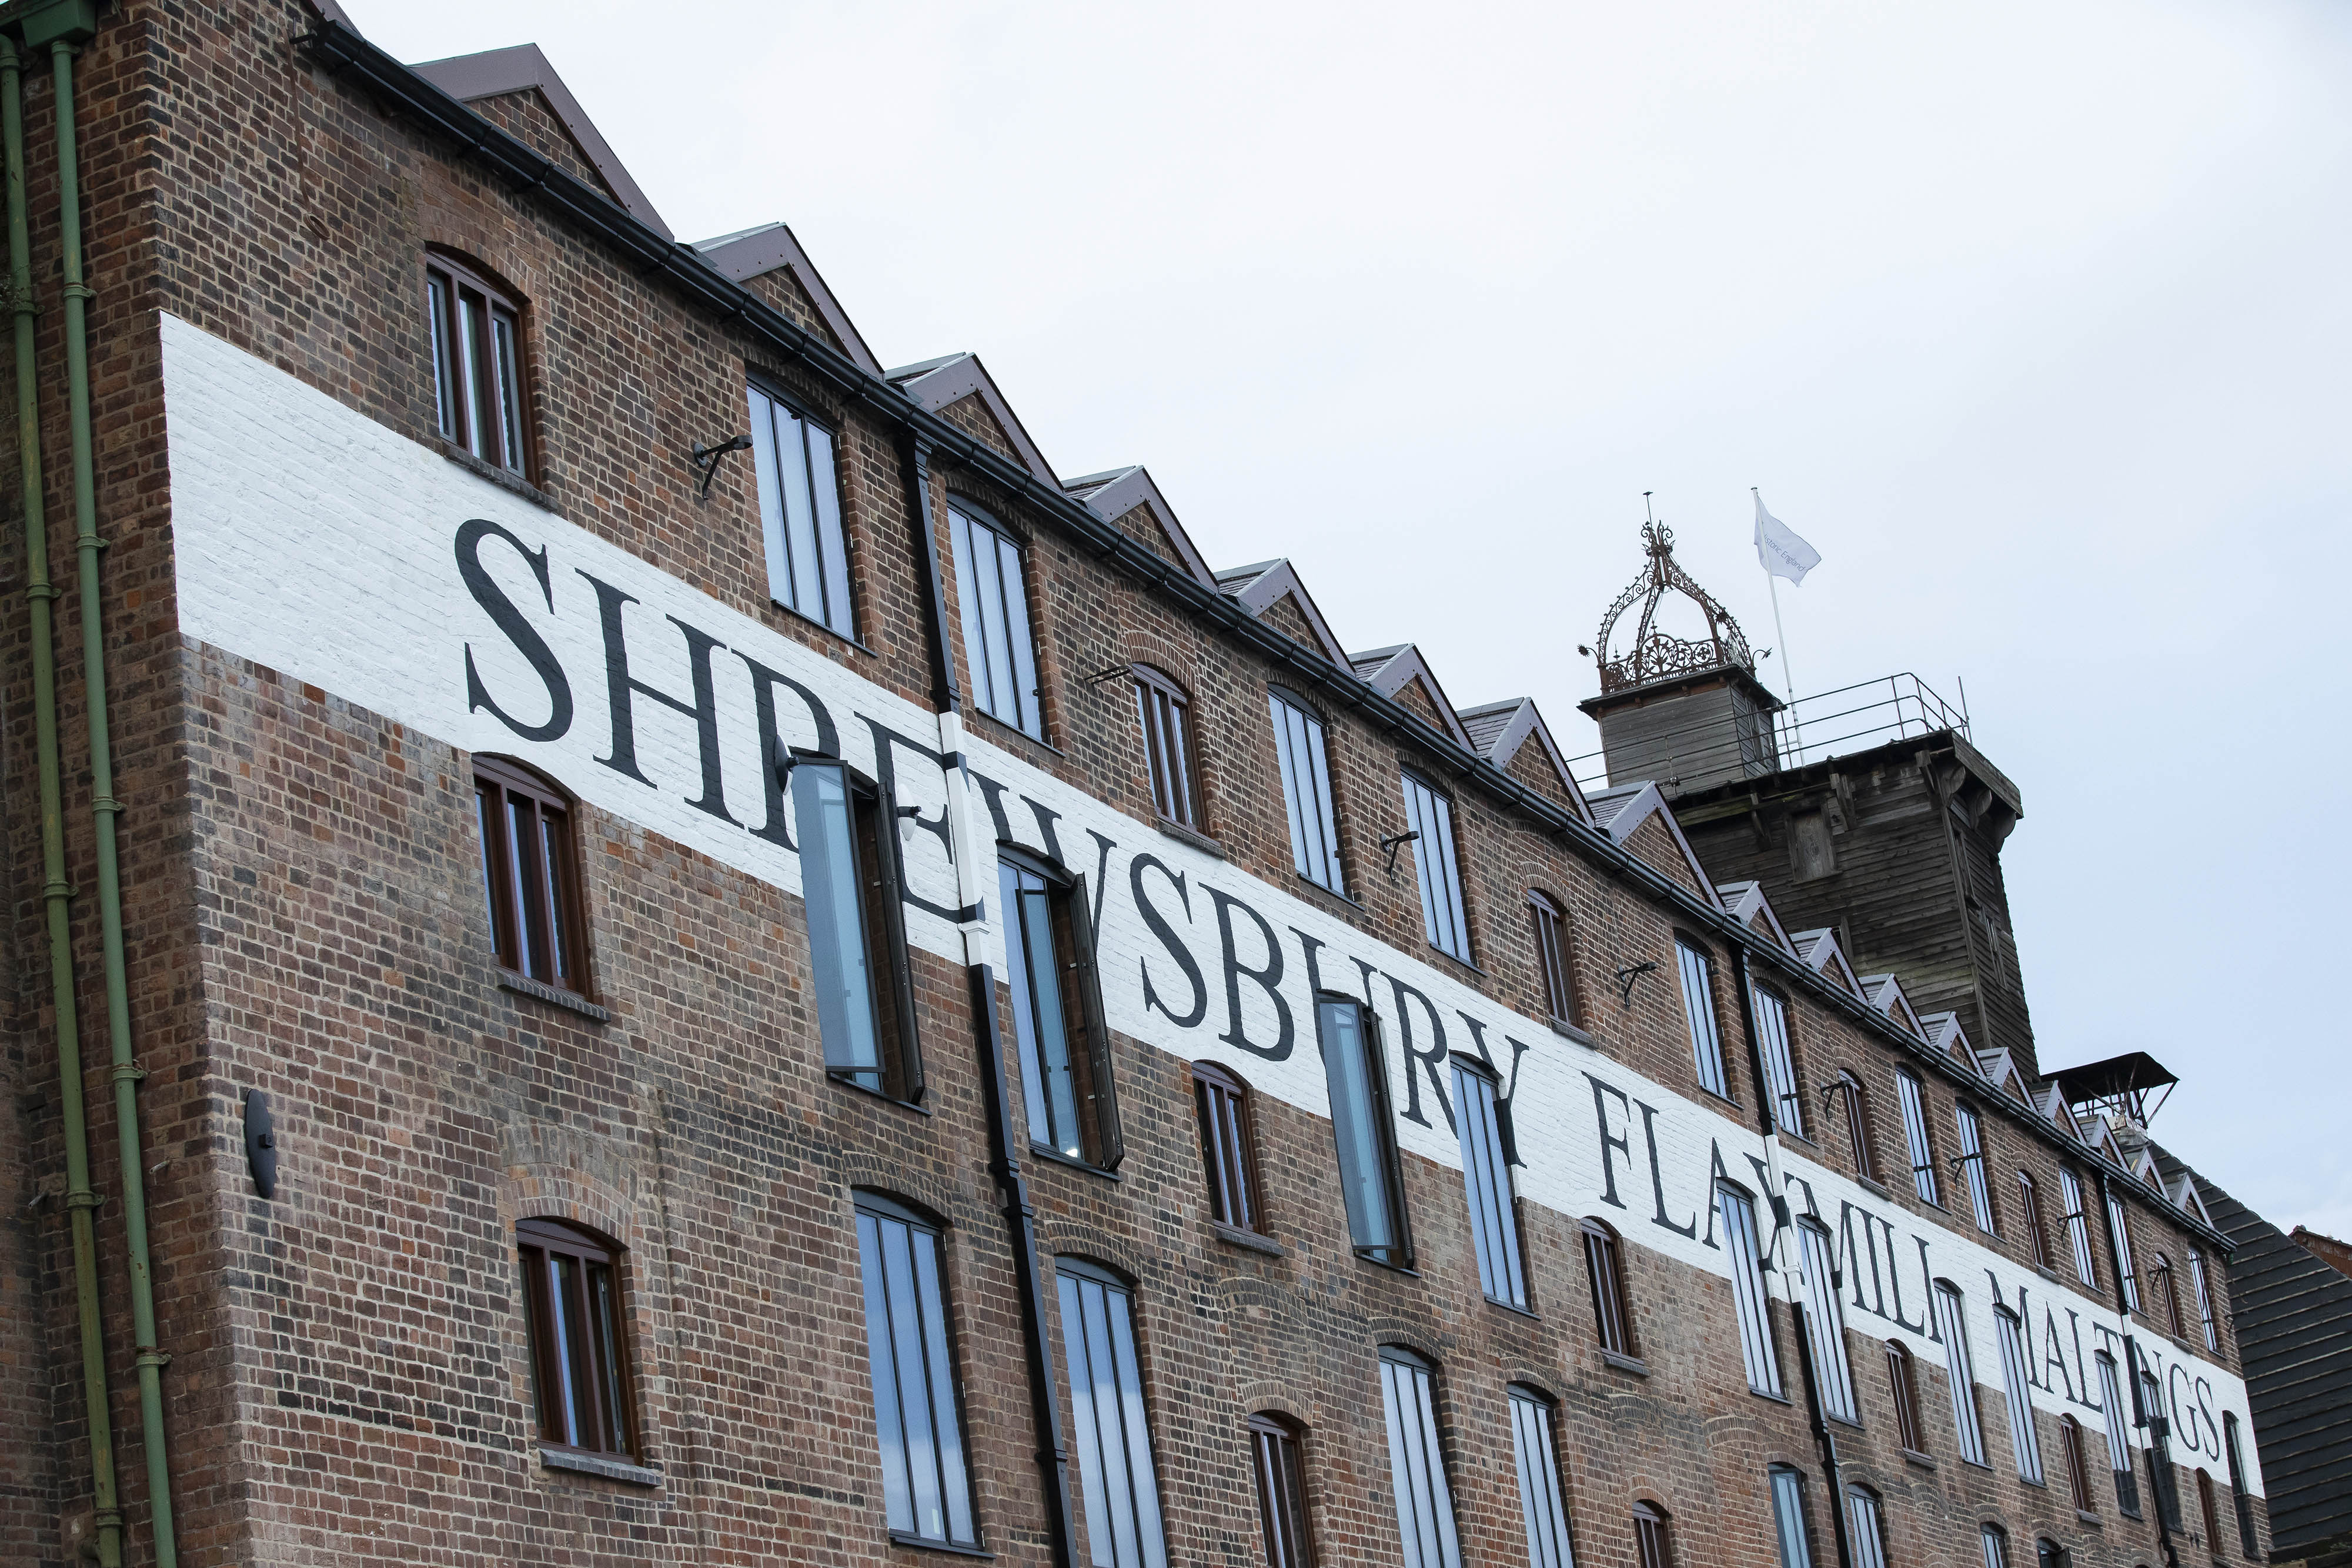 Sidelong view of mill building with the words 'Shrewsbury Flaxmill Maltings' painted in black on a white band on the building